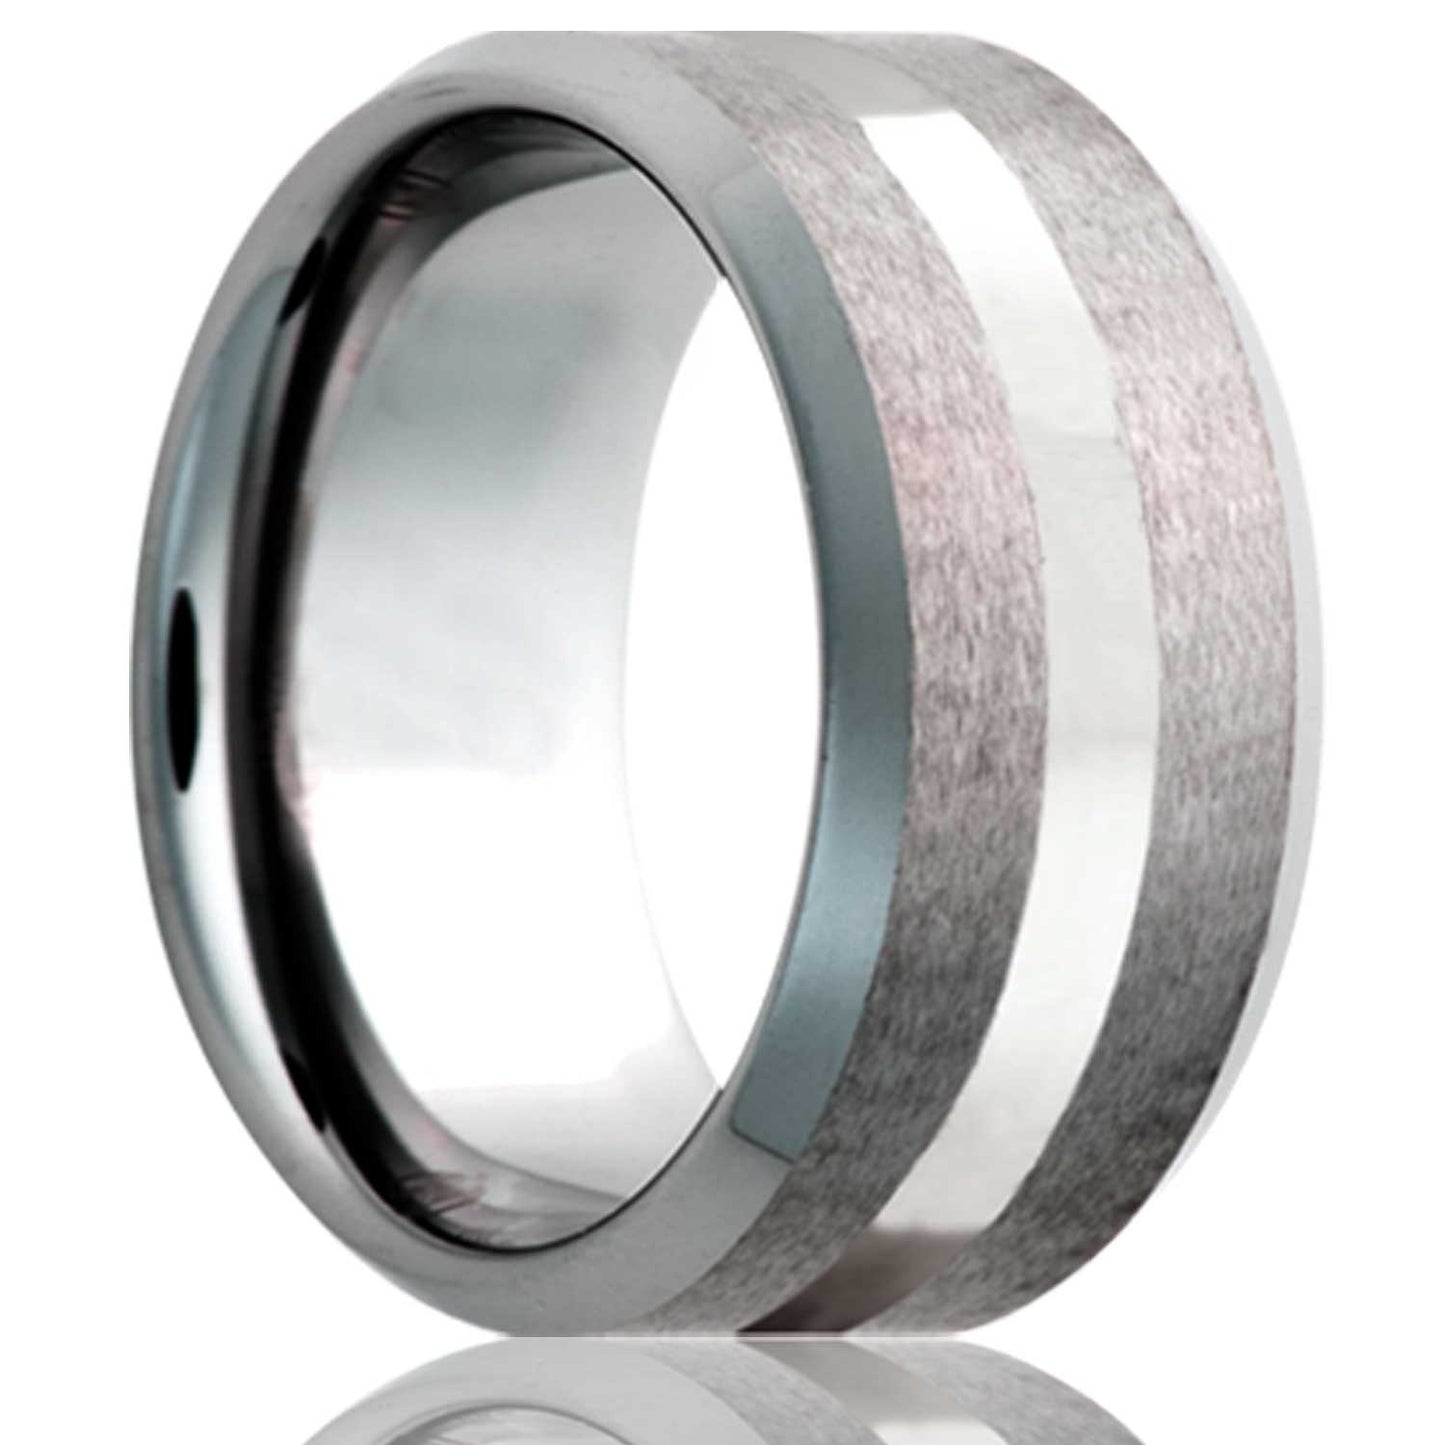 A argentium silver inlay satin finish tungsten wedding band with beveled edges displayed on a neutral white background.